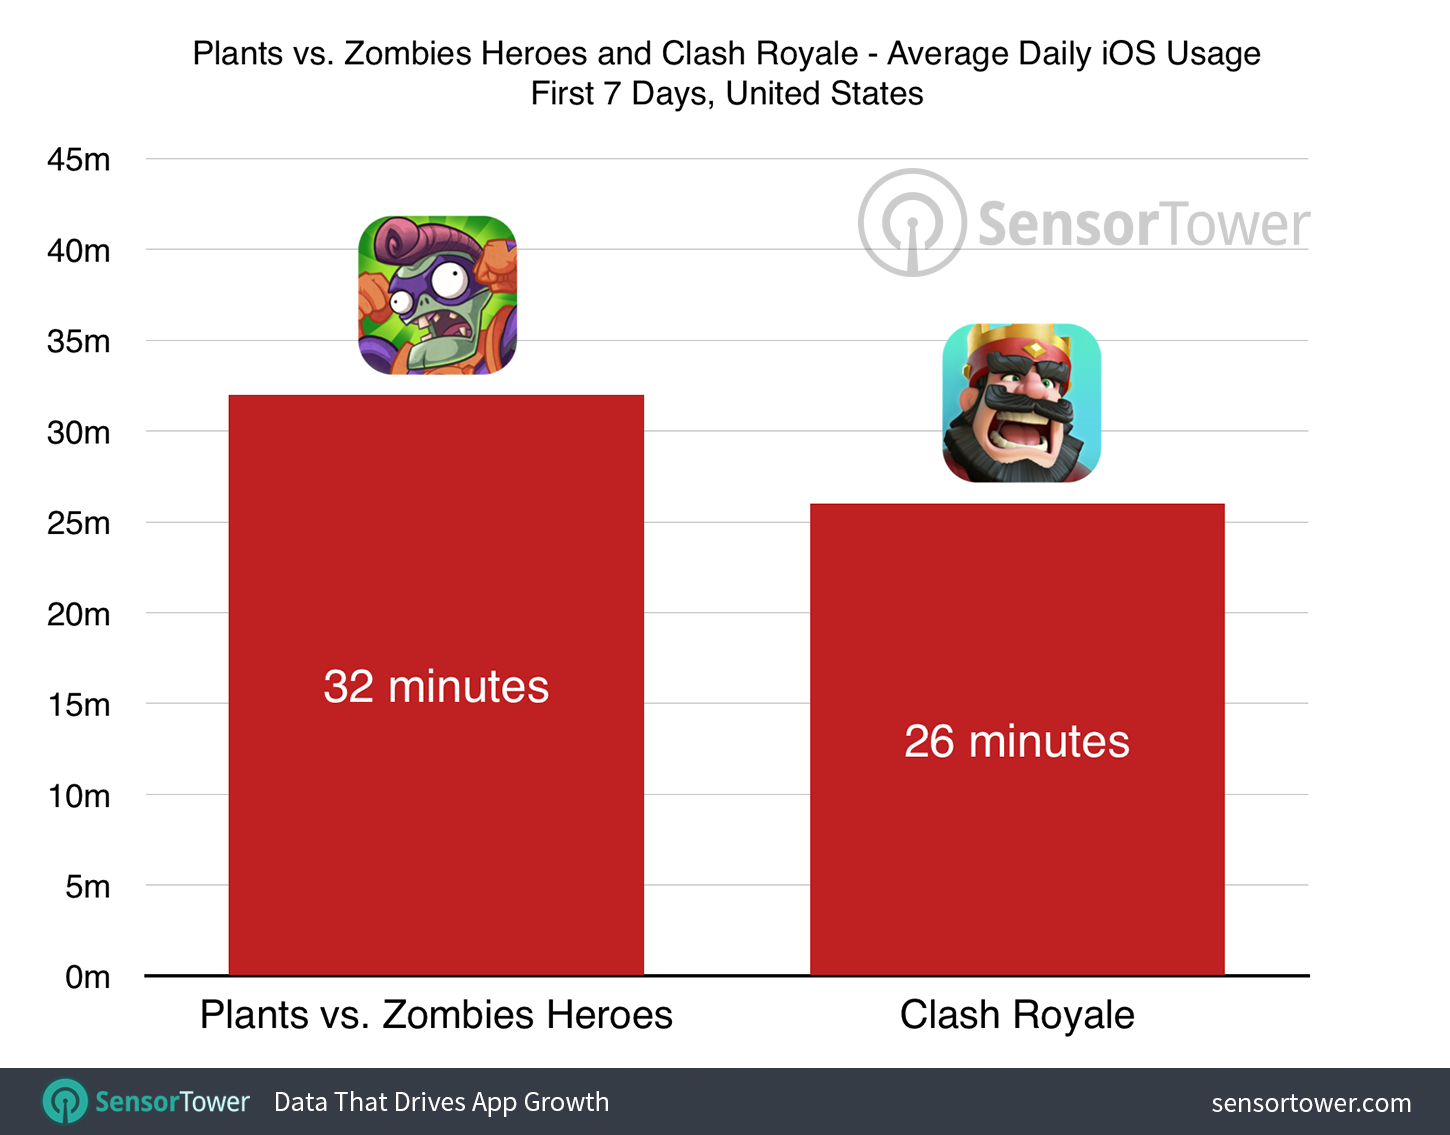 Plants vs. Zombies Heroes and Clash Royale Usage Comparison Chart for iOS in the United States